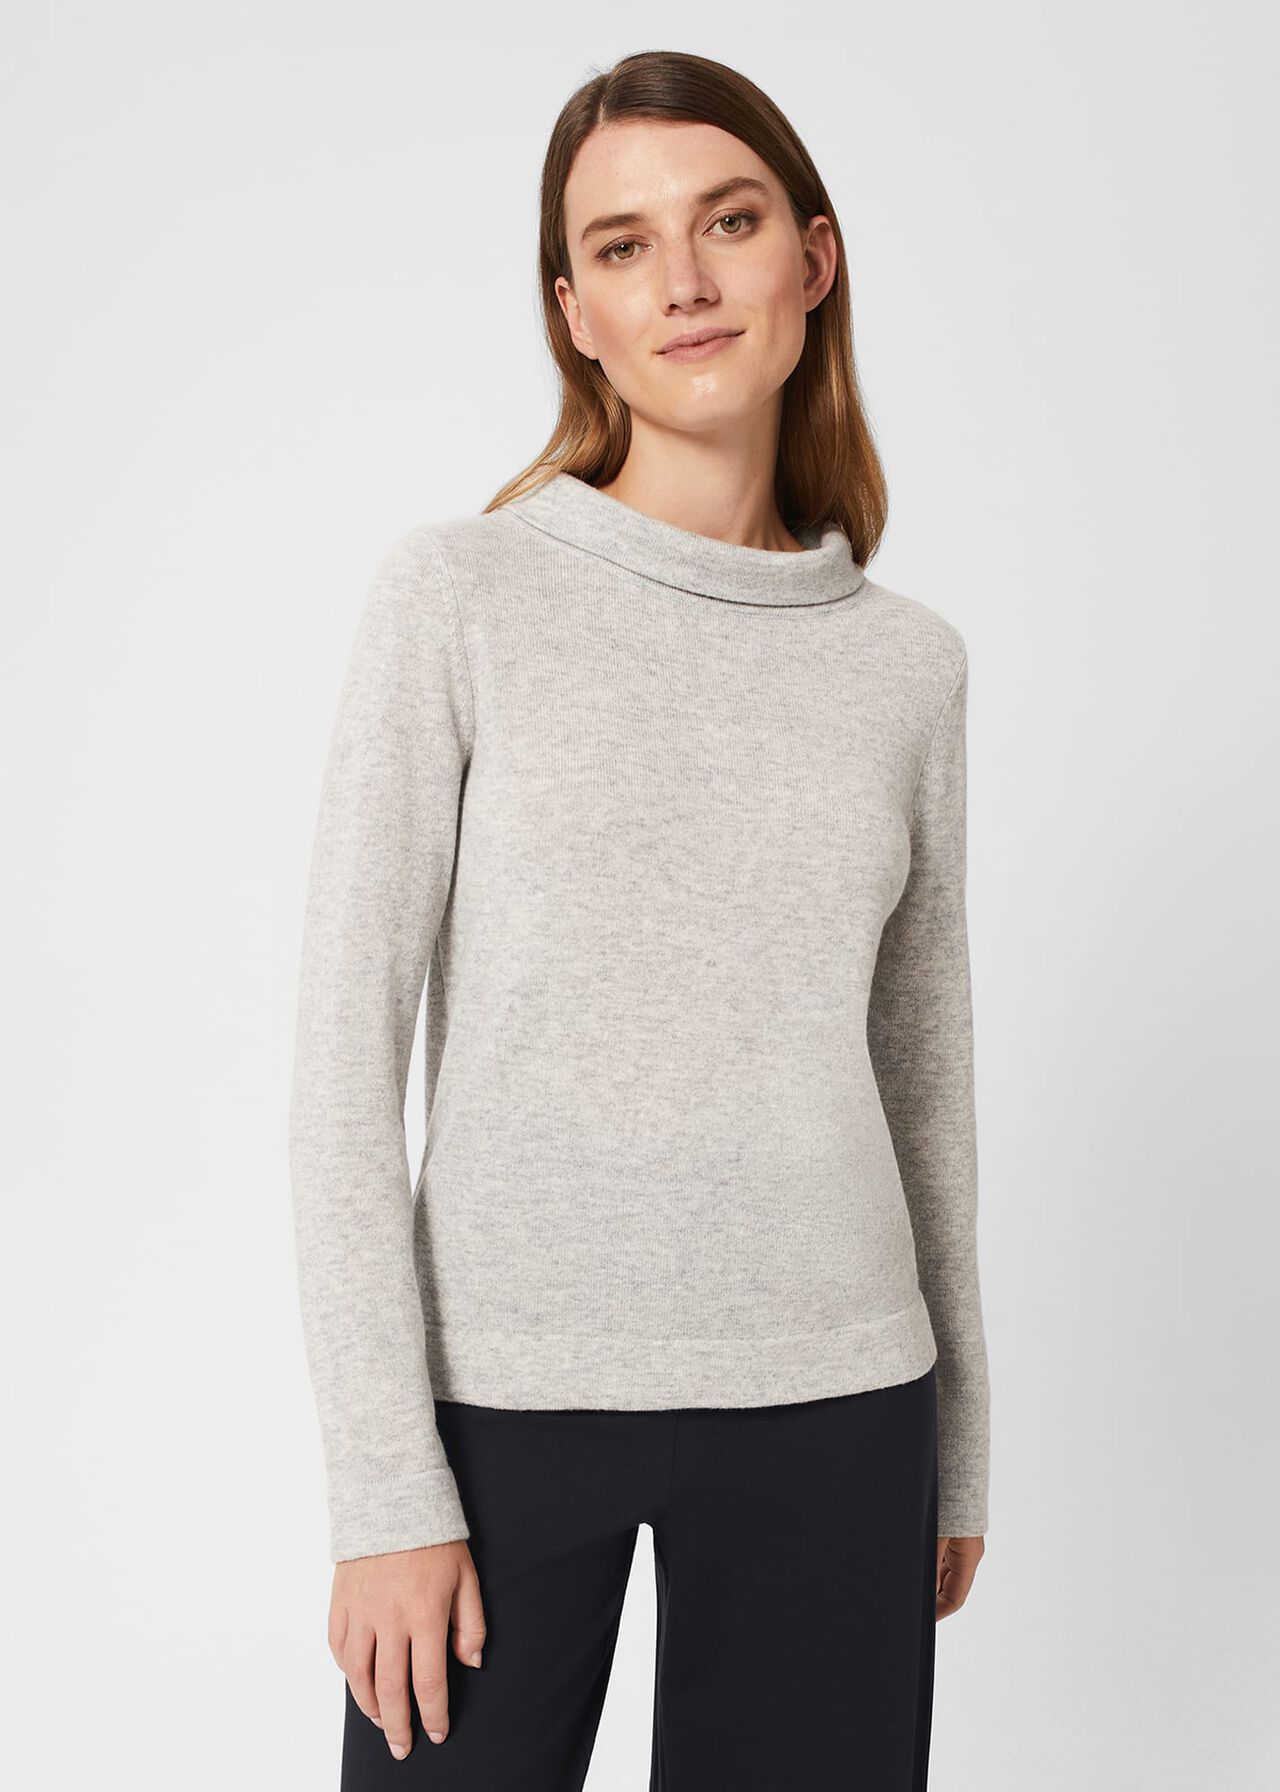 Audrey Wool Cashmere Sweater, Pale Grey Marl, hi-res